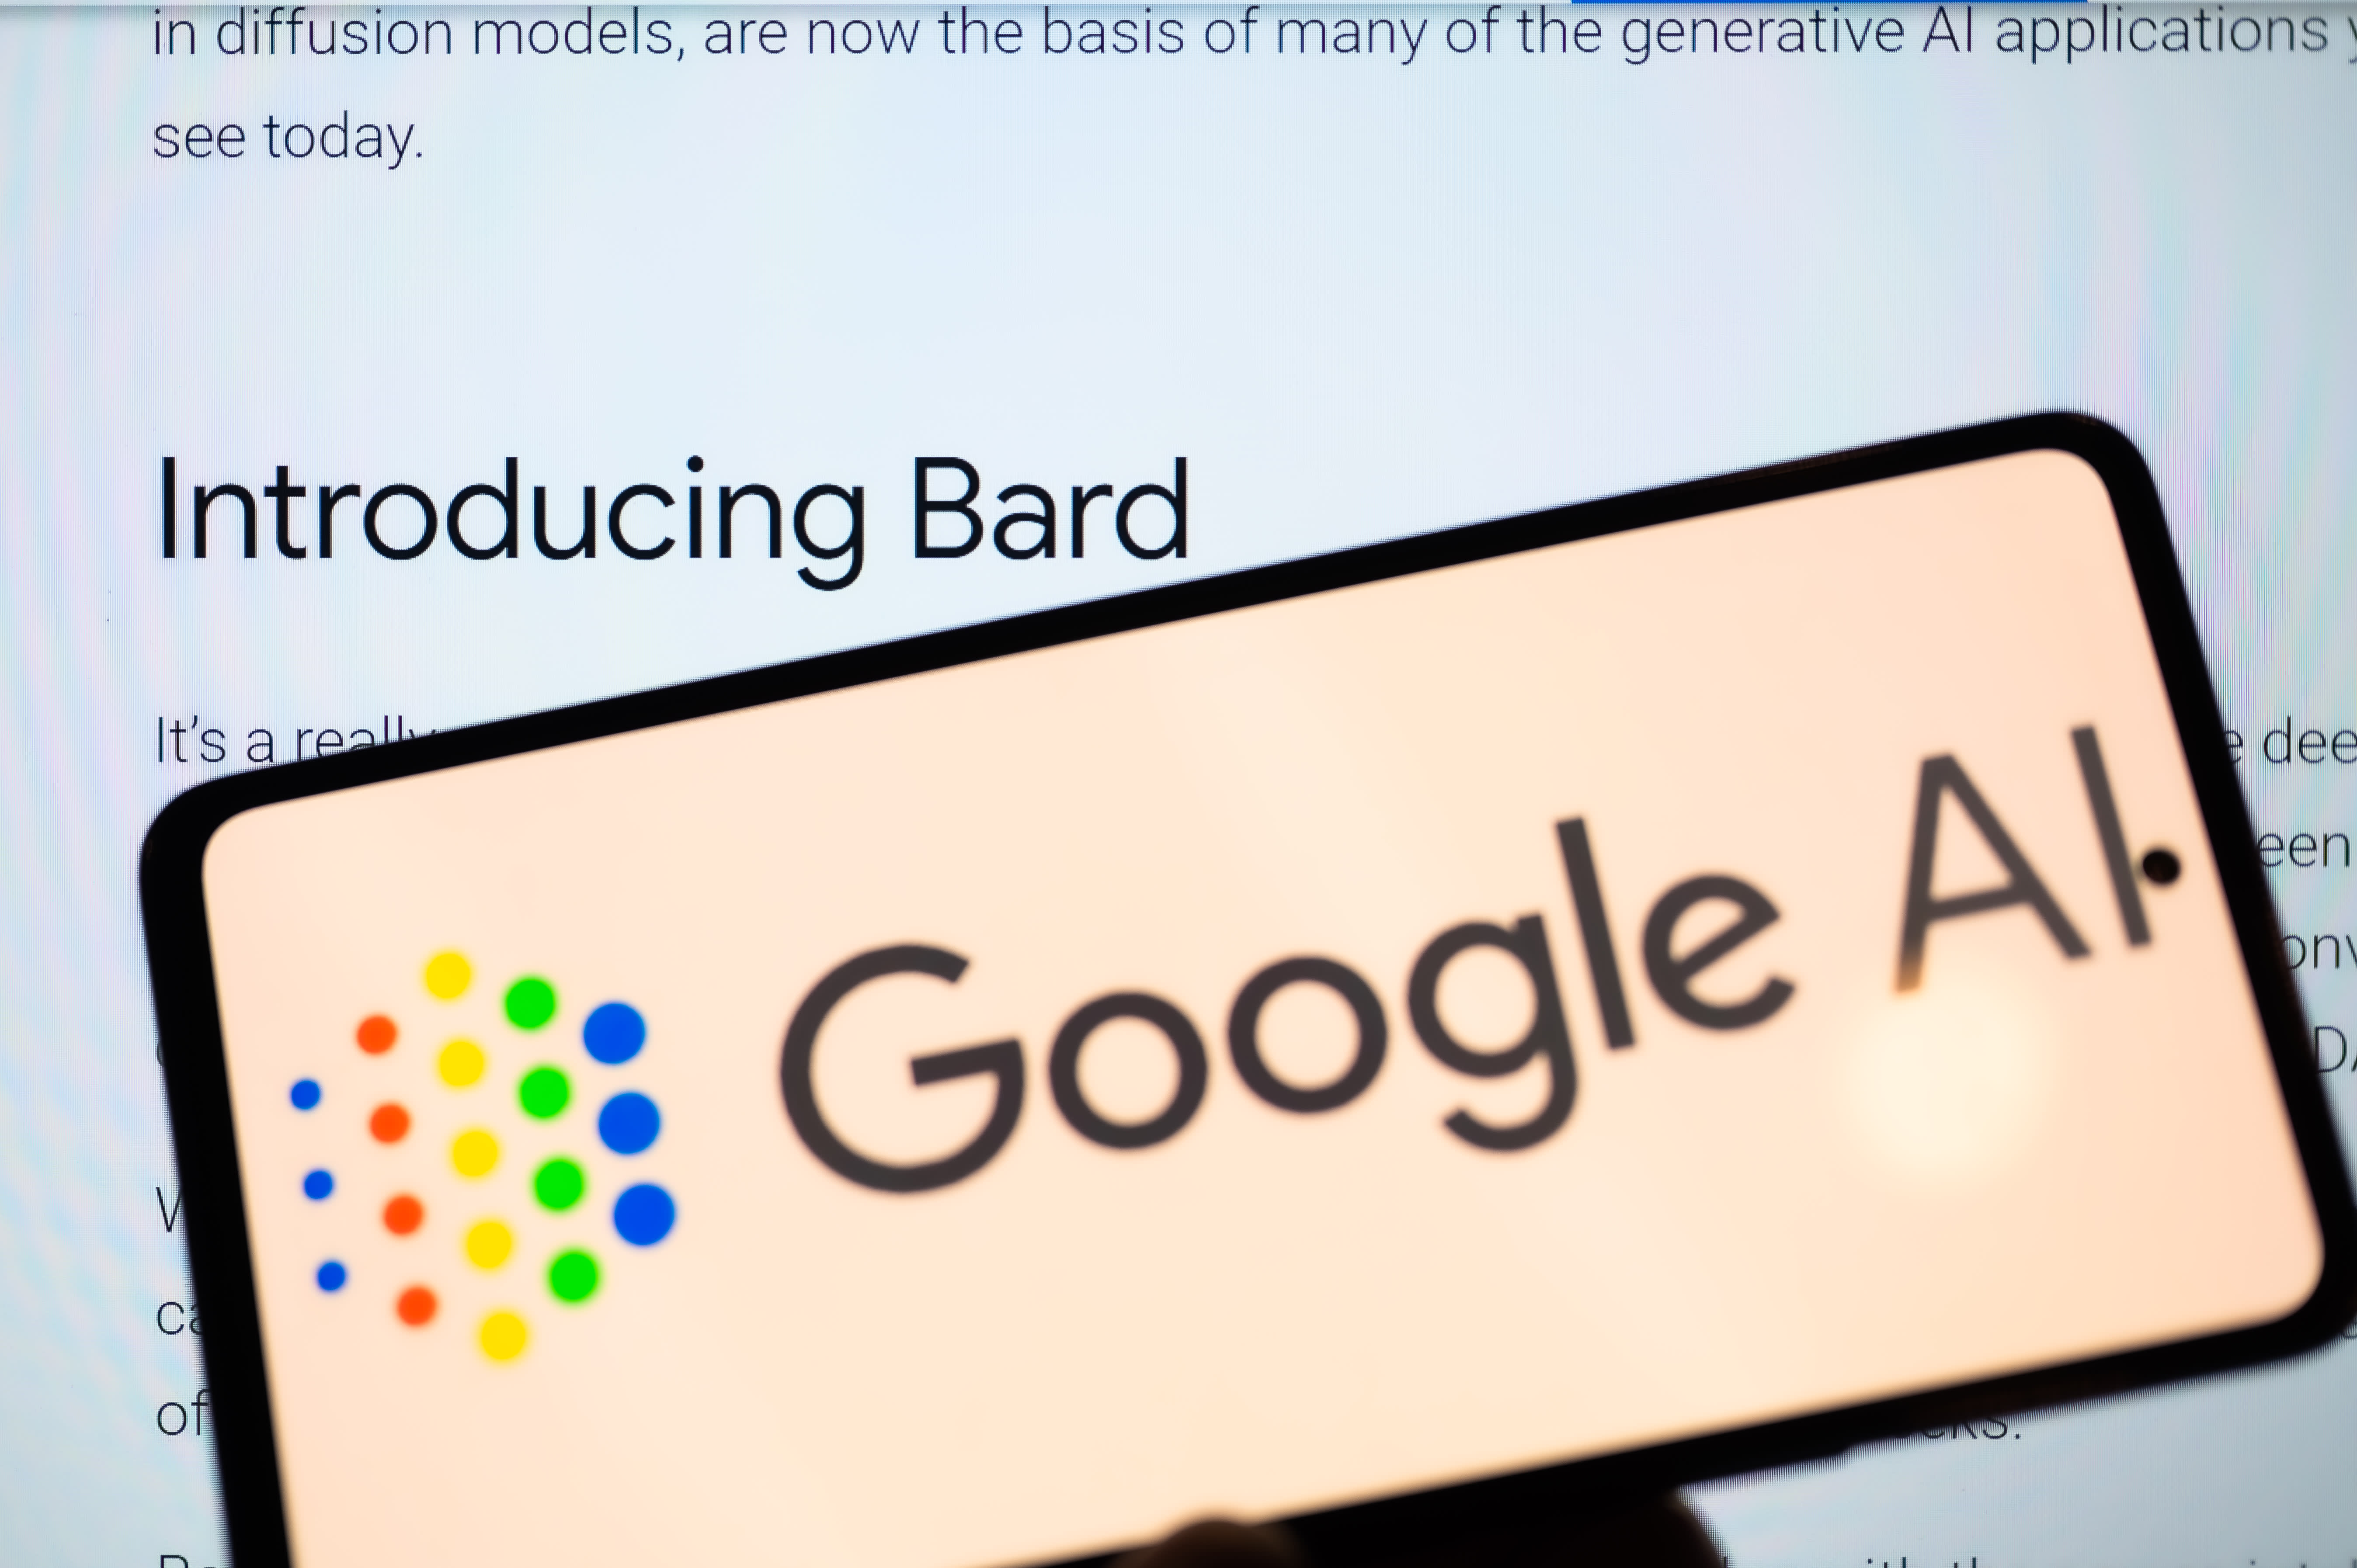 What Bard said when Google VC AI asked about the value of diversity of work